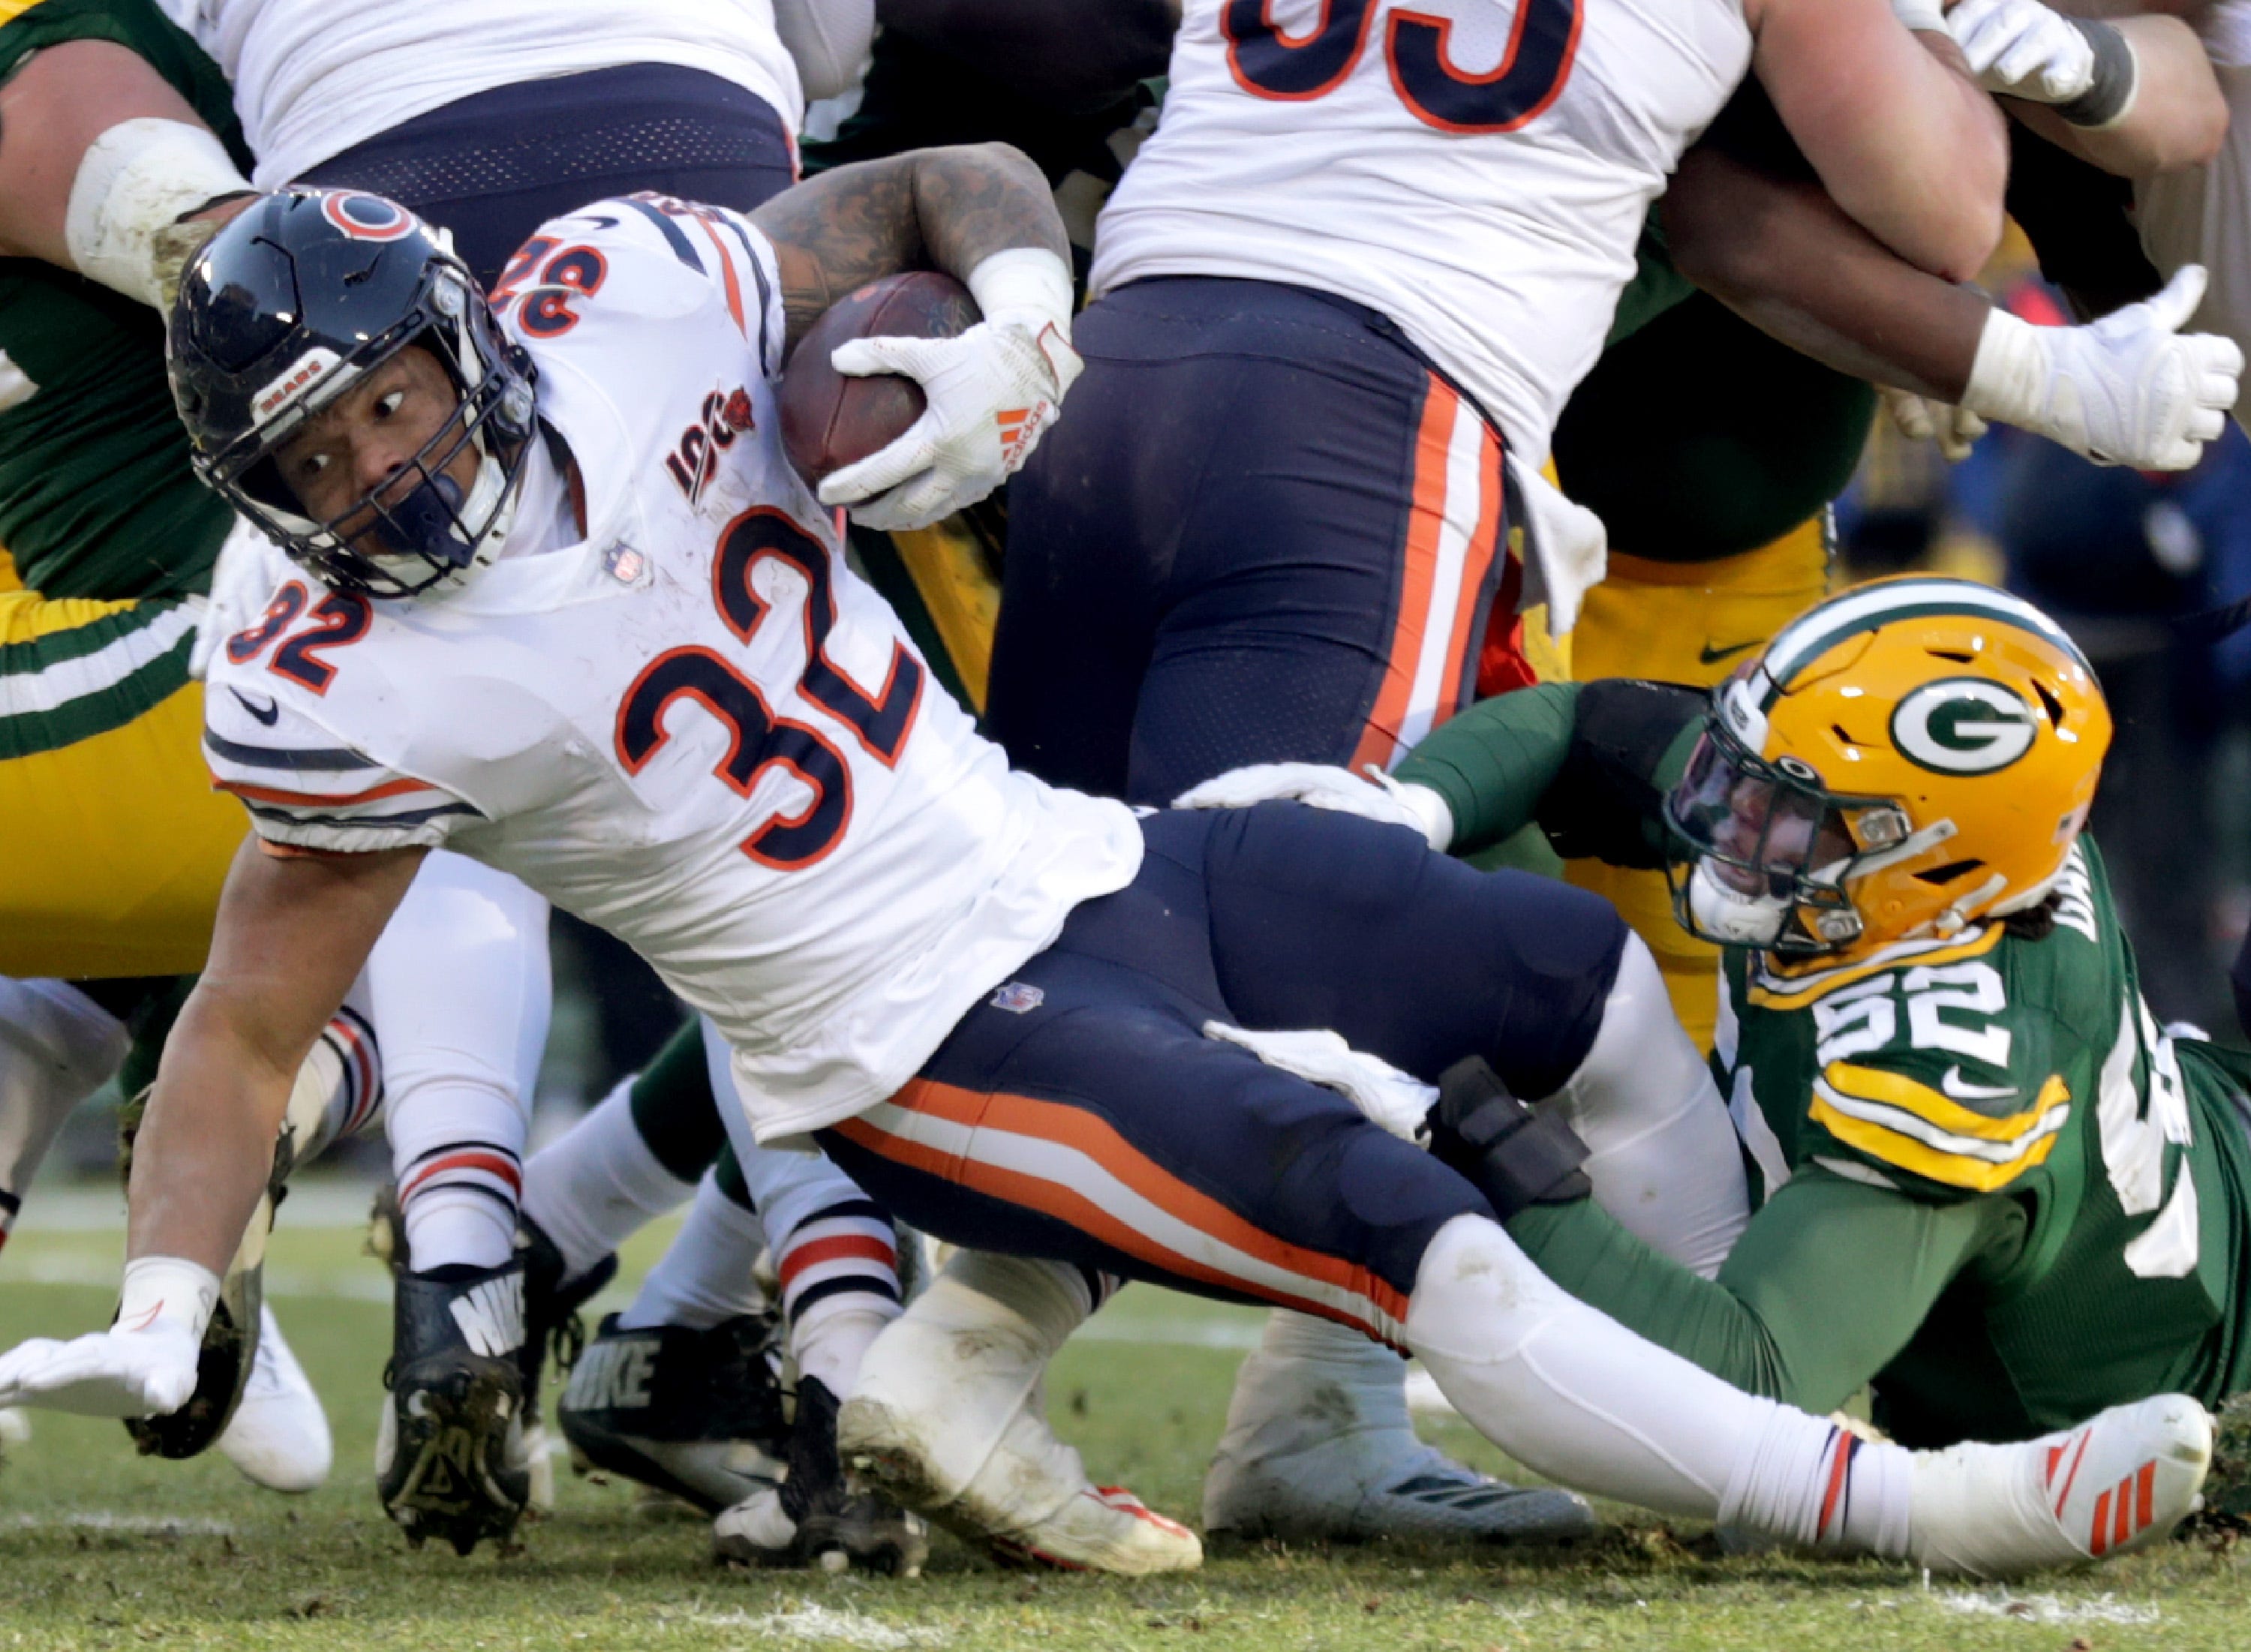 Chicago Bears running back David Montgomery (32) stretches for yards while being tackled by Green Bay Packers linebacker Rashan Gary (52) during their football game on Sunday, December 15, 2019, at Lambeau Field in Green Bay, Wis.